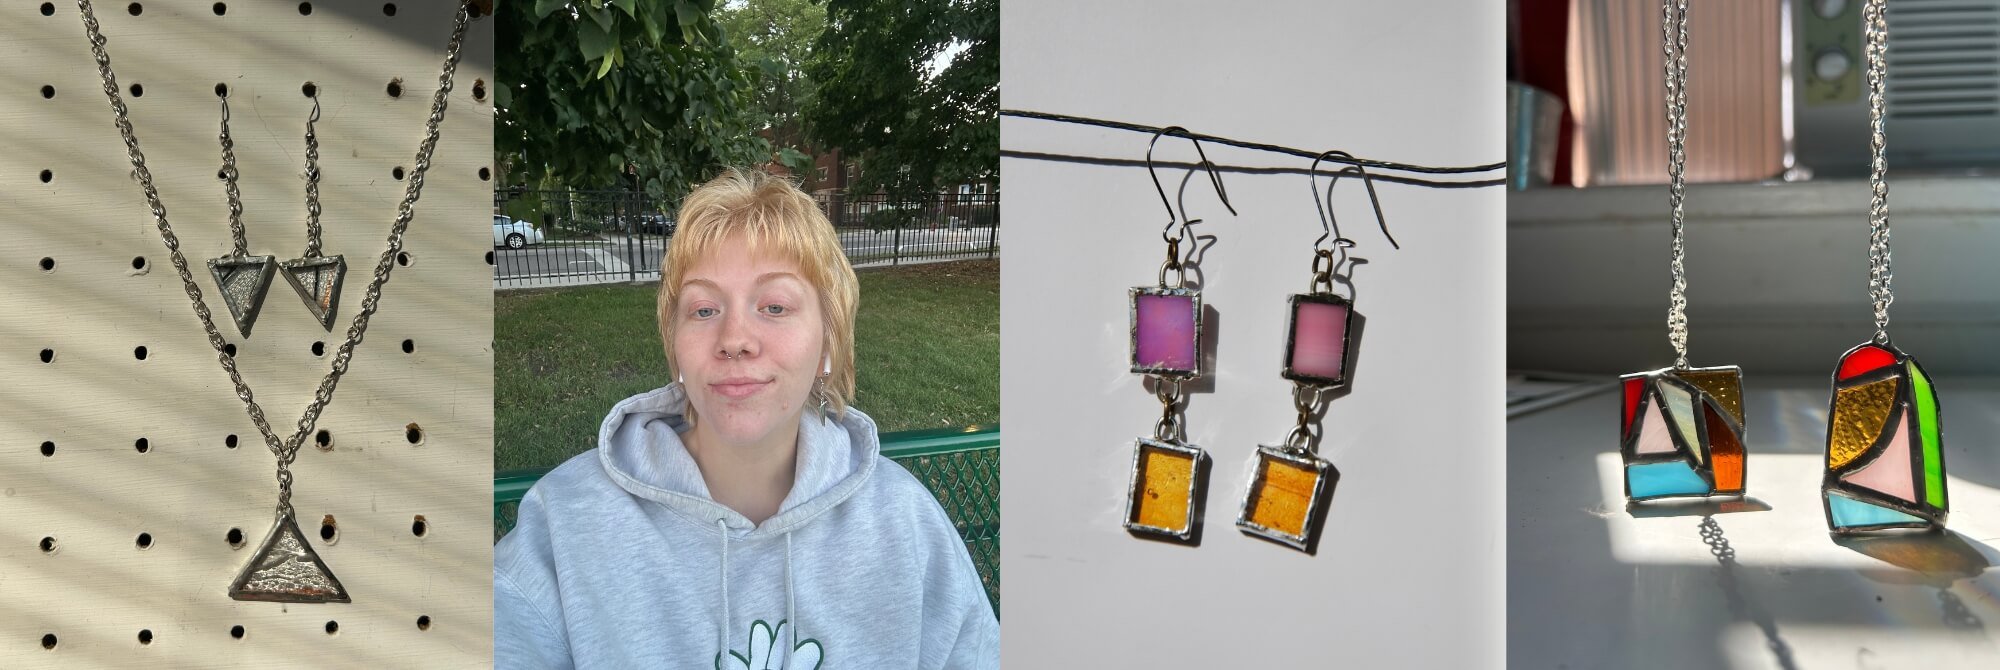 Stained Glass Jewelry Workshop - July 14